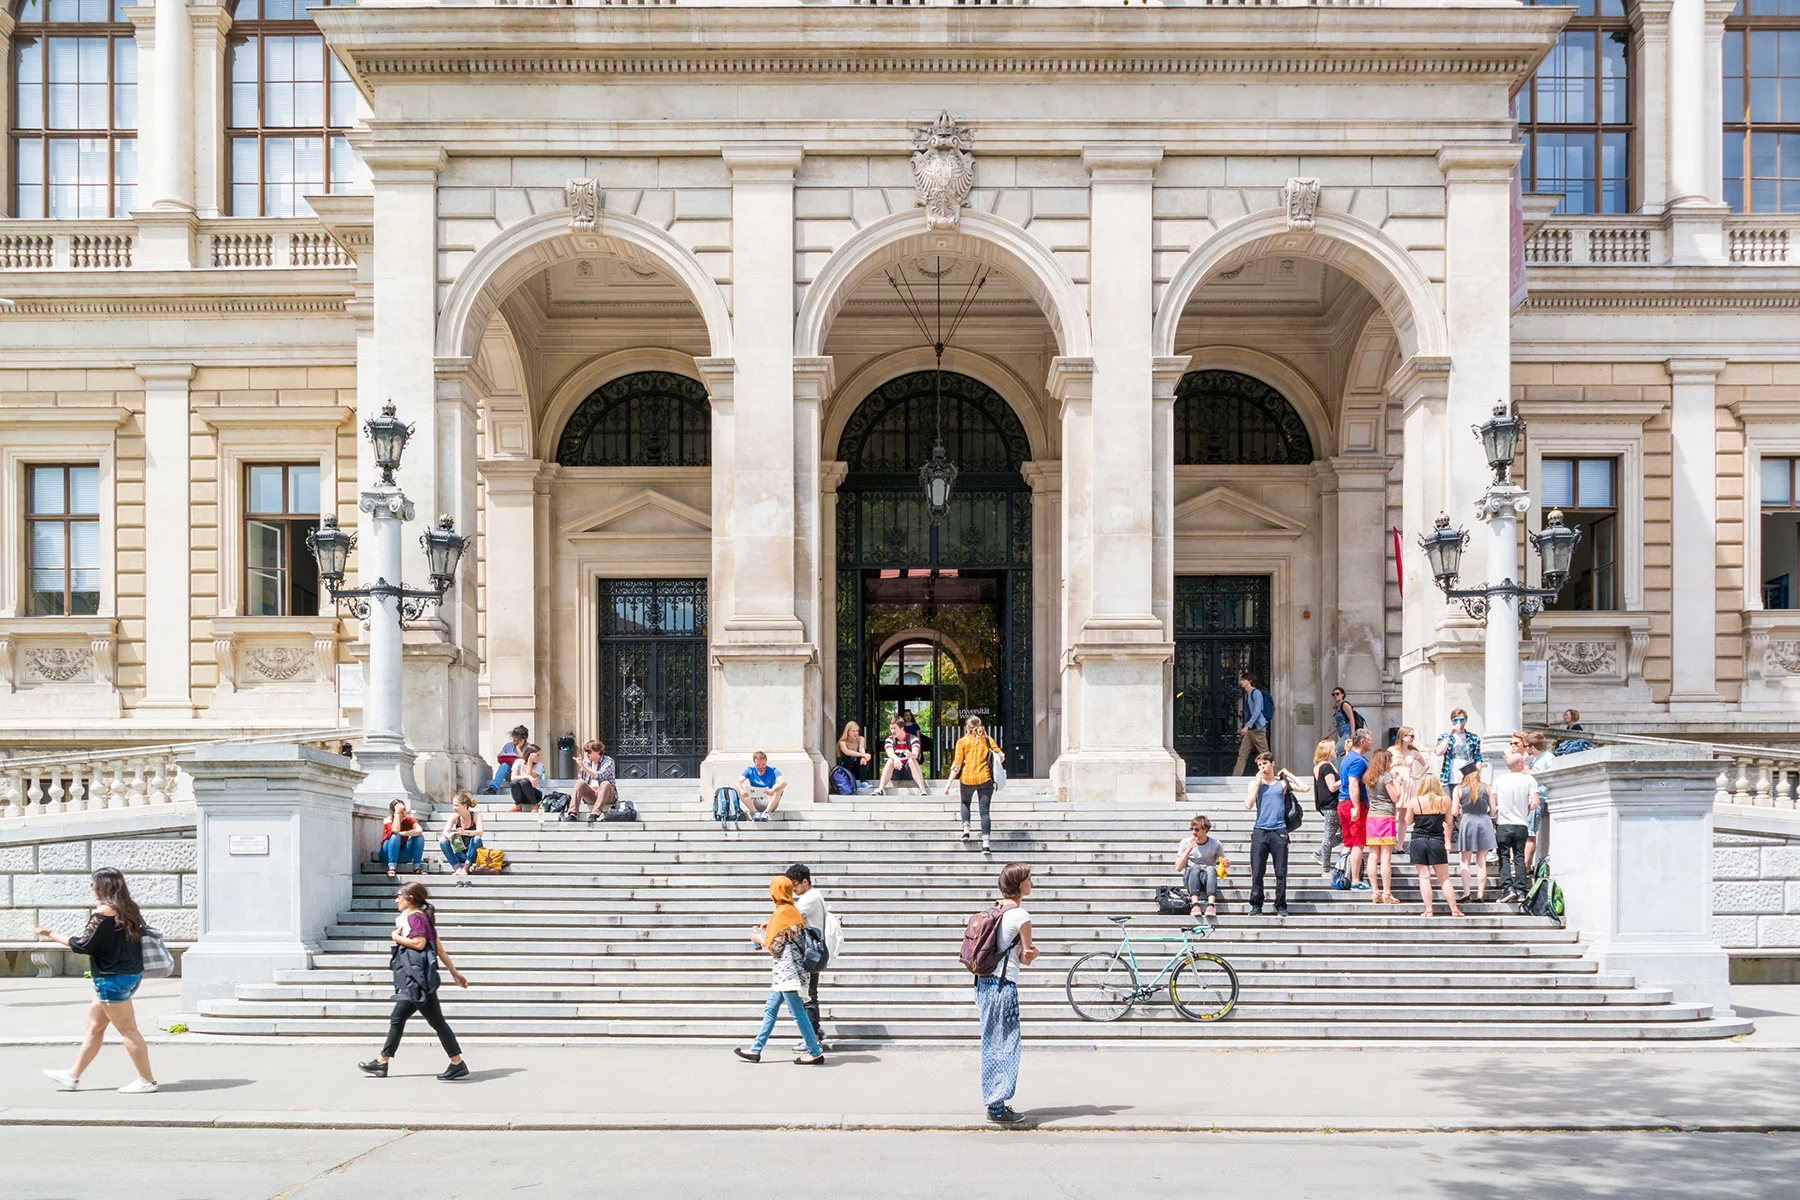 Entrance to the University of Vienna